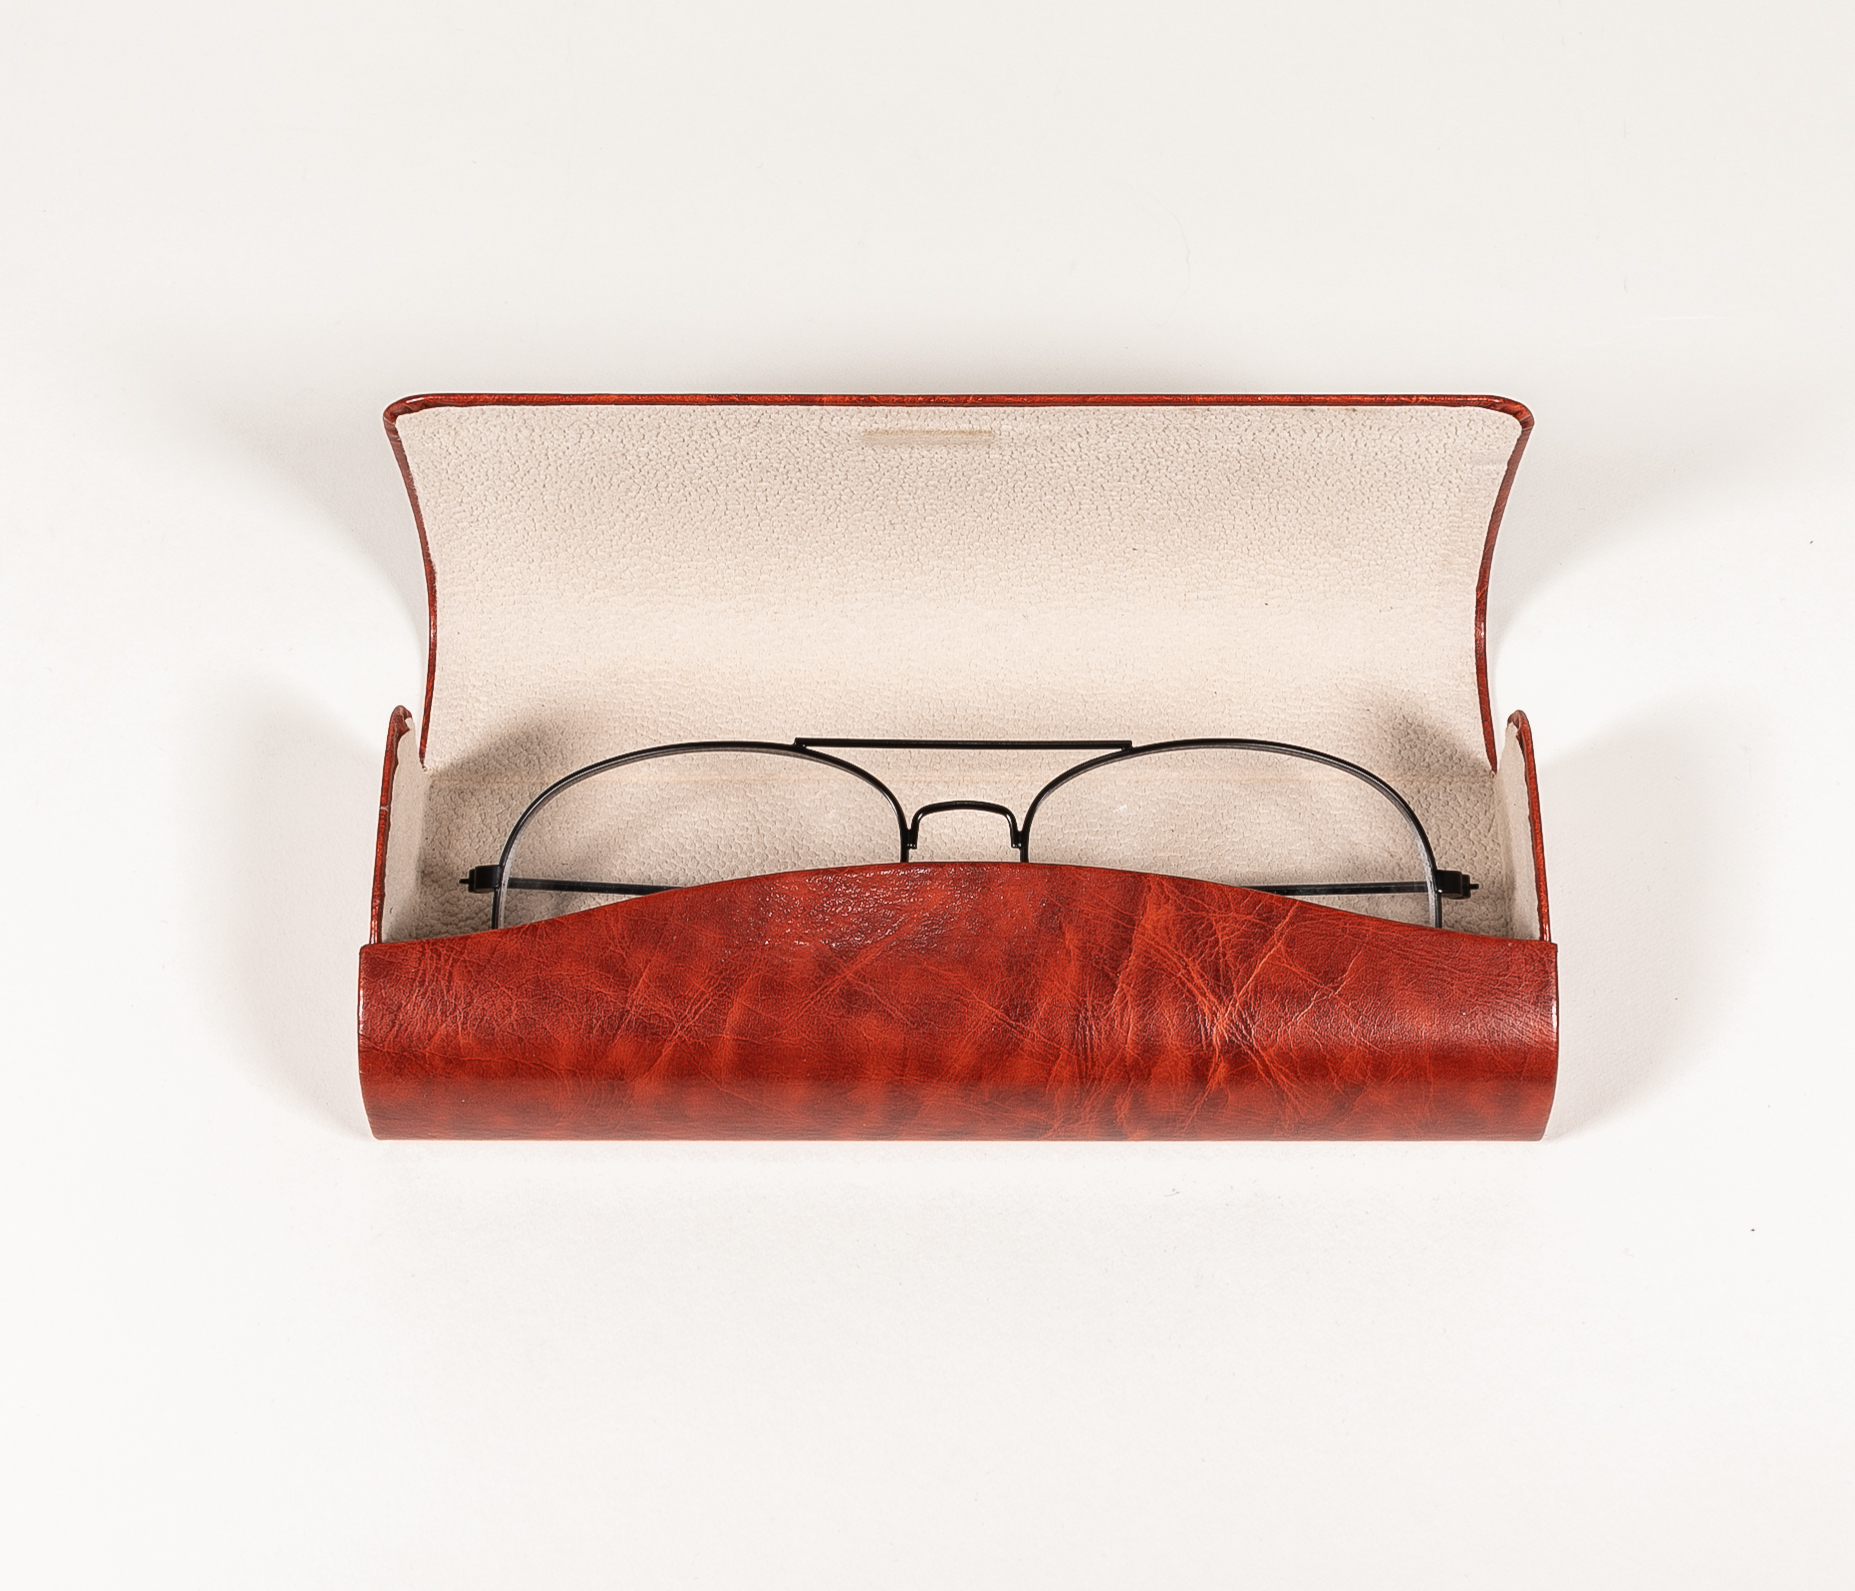 The 2021 sunglasses, a hand-made glasses case in two colors with a semicircular appearance on the side